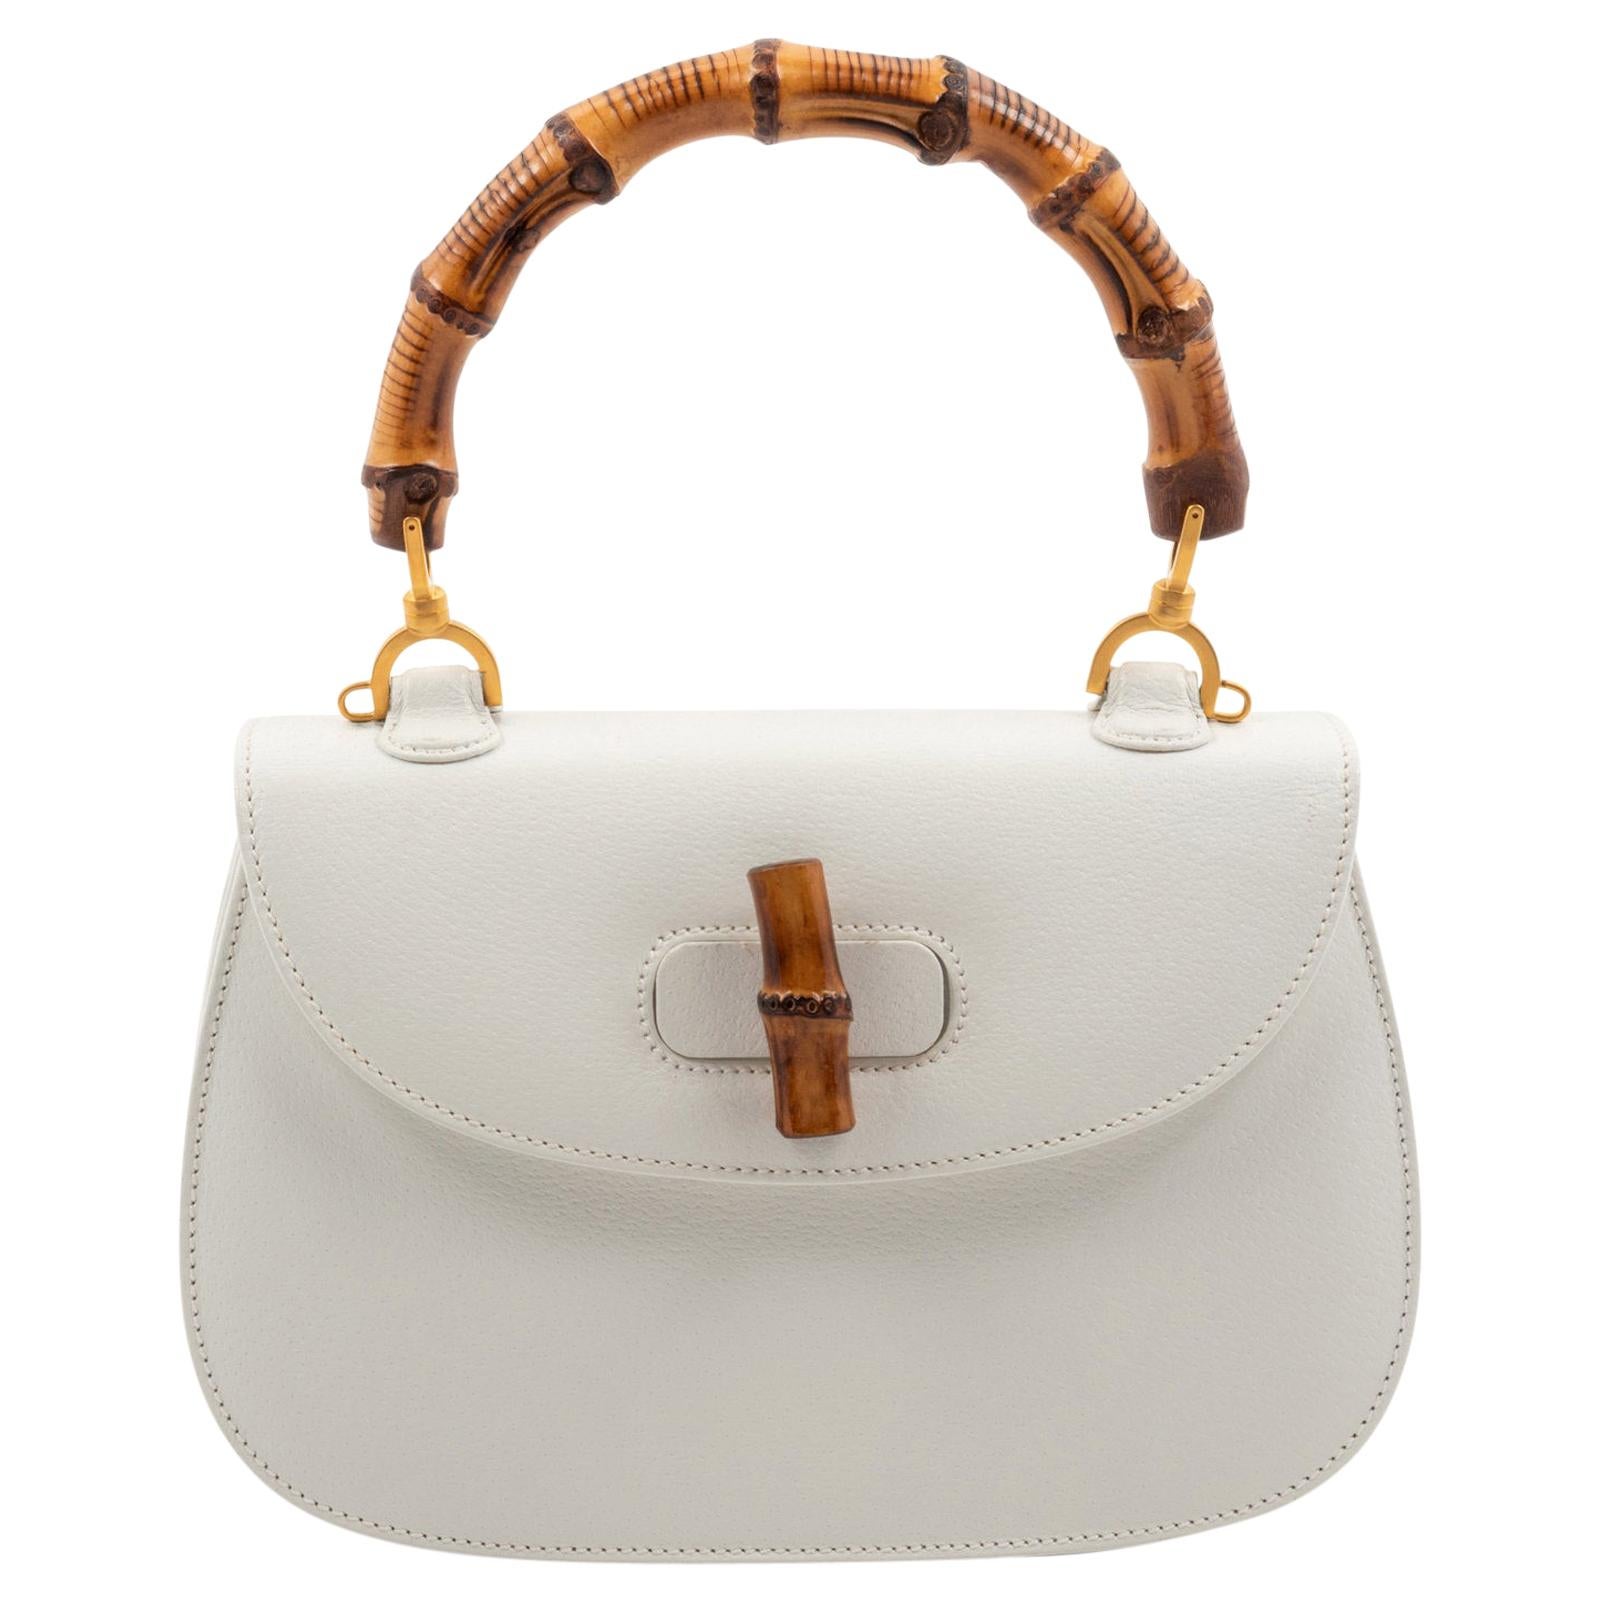 Gucci White Leather Handbag with Bamboo Handle